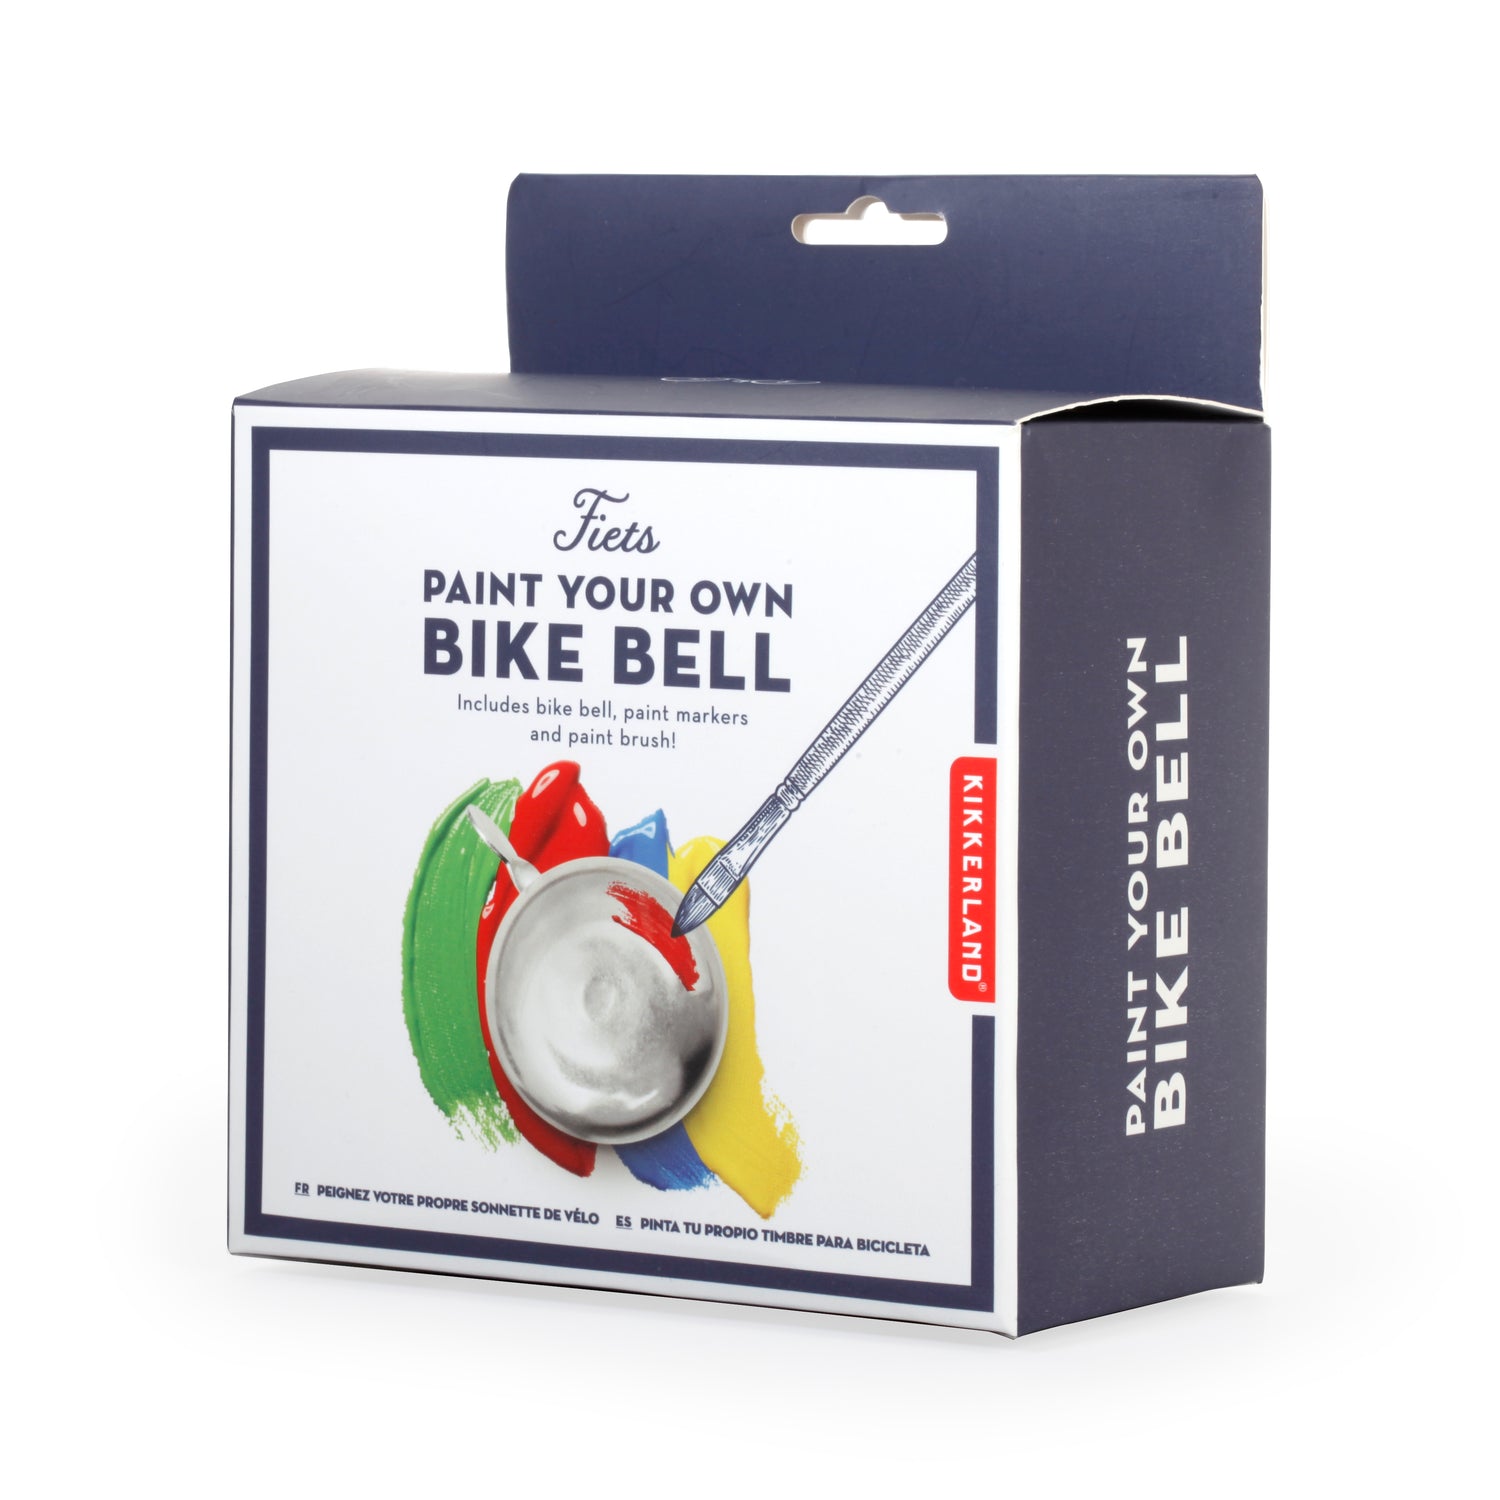 Fiets DIY Paint Your Own Bike Bell